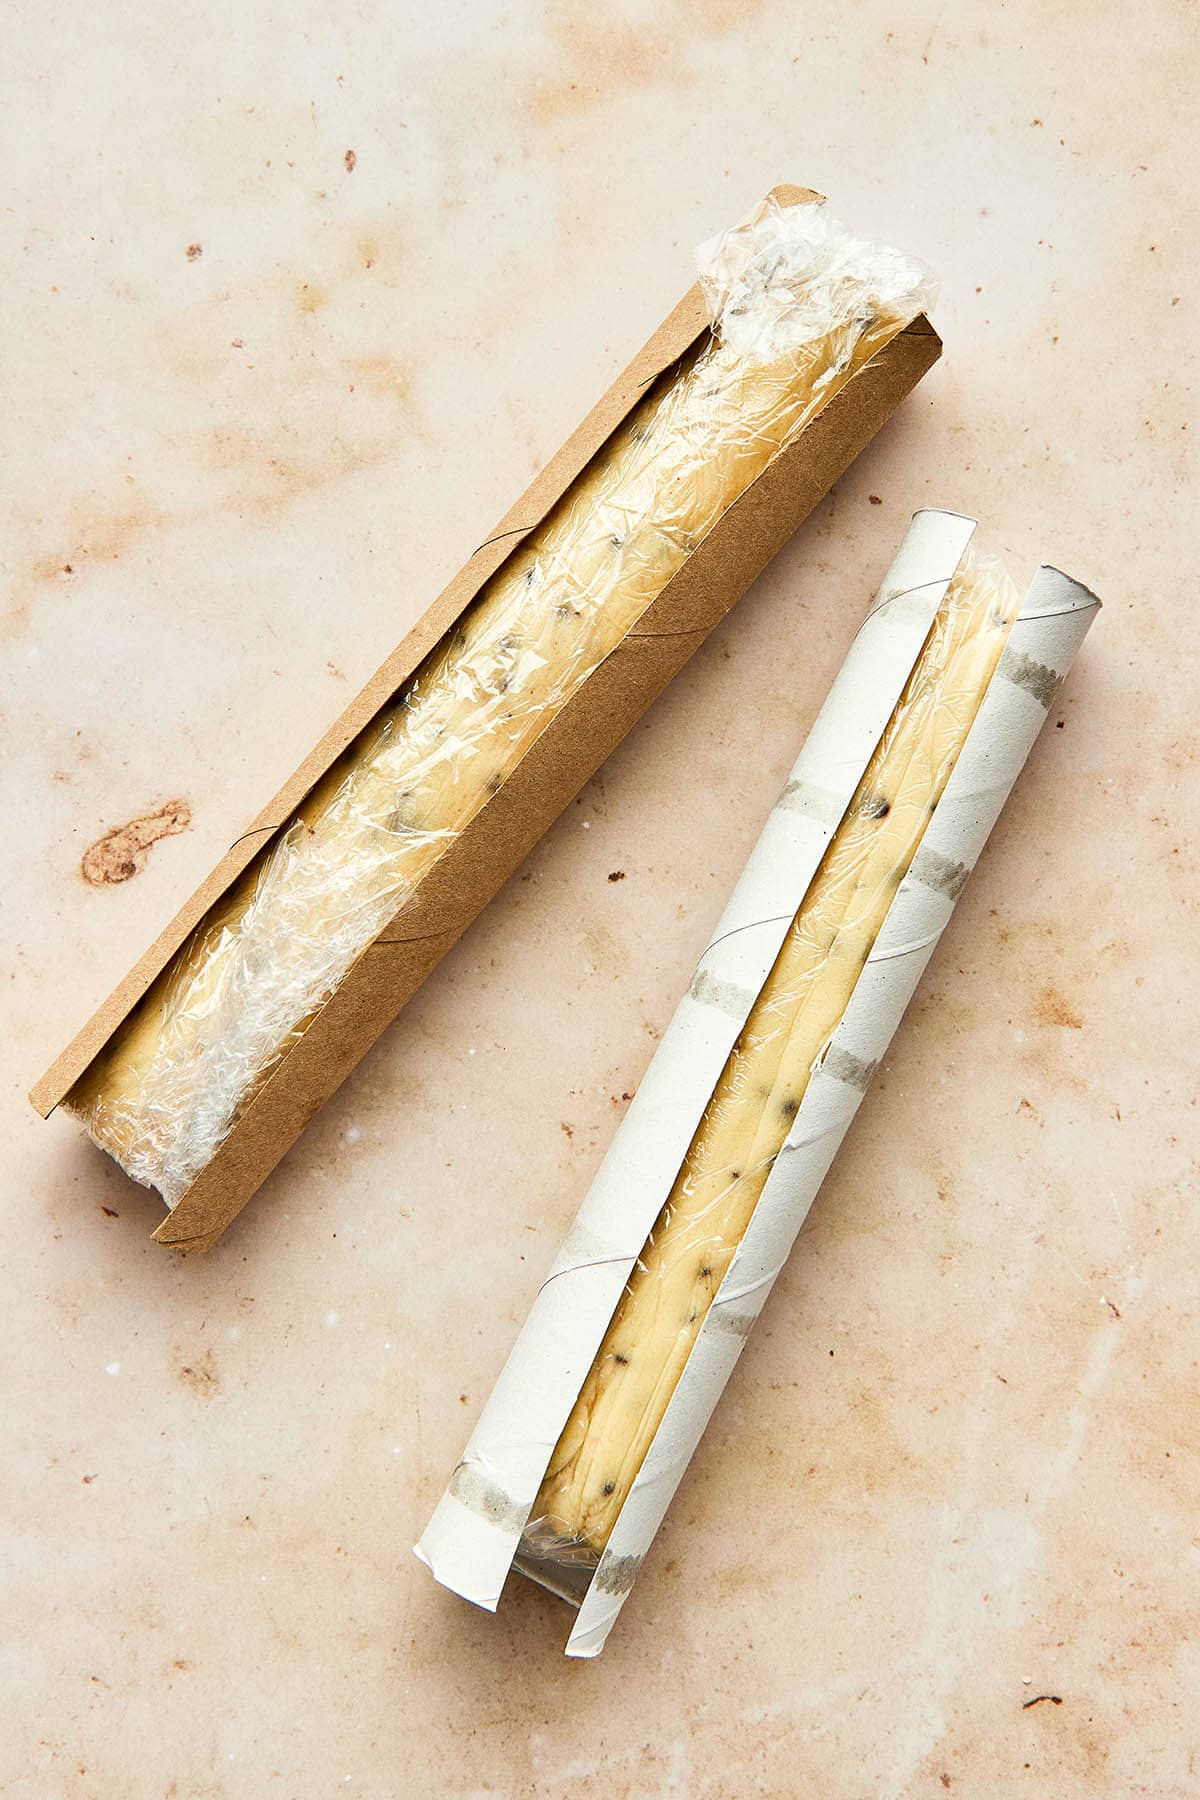 Logs of cookie dough rolled in plastic wrap and set into two cardboard paper towel tubes which have been cut down the length.